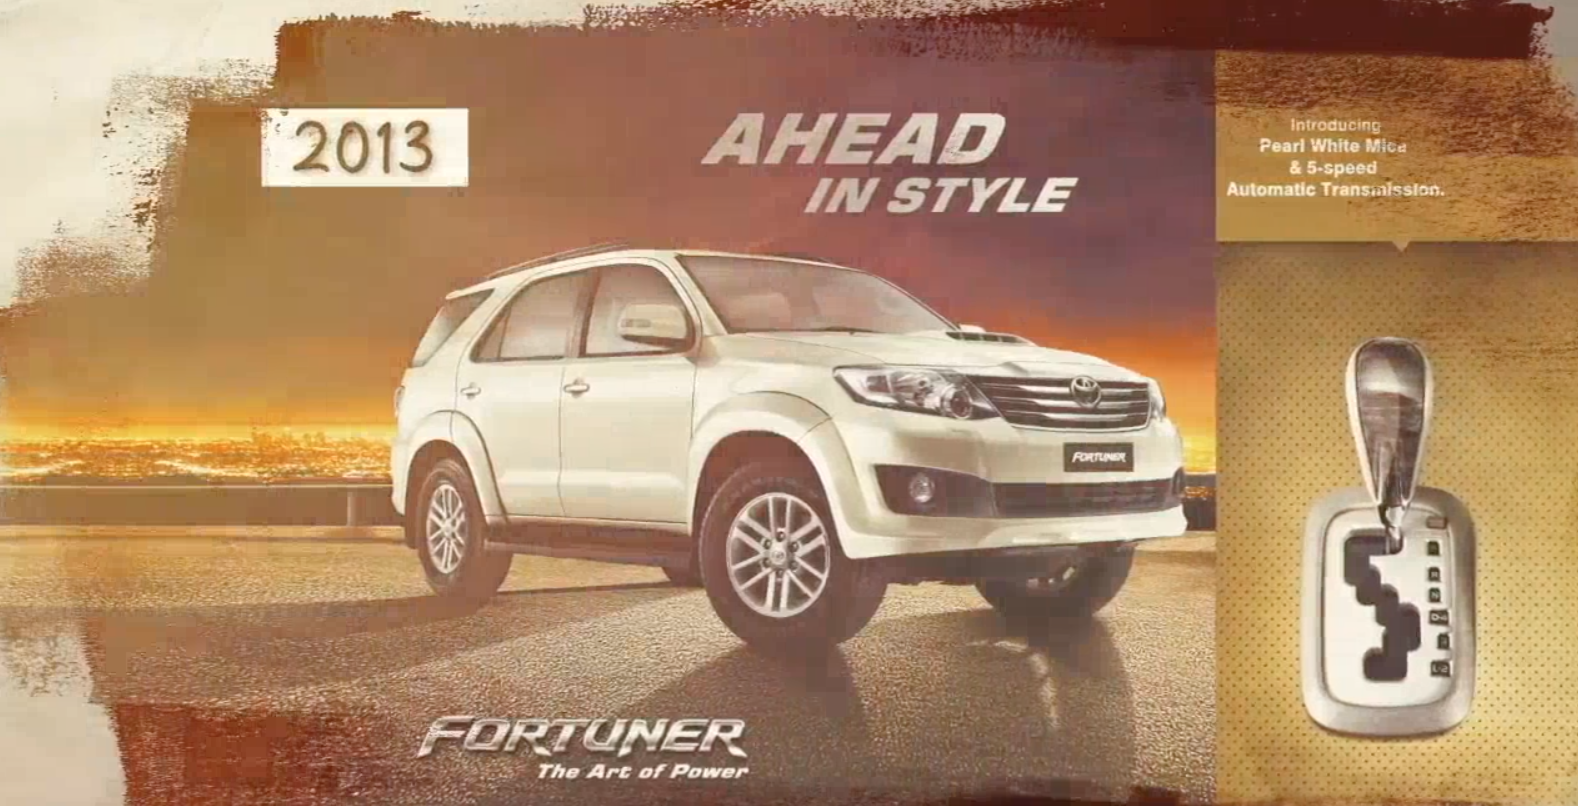 <div>
<div>The Toyota&nbsp;Fortuner&#39;s journey in India so far to become the leader in the full-size SUV space, from launch in 2009.</div>
</div>